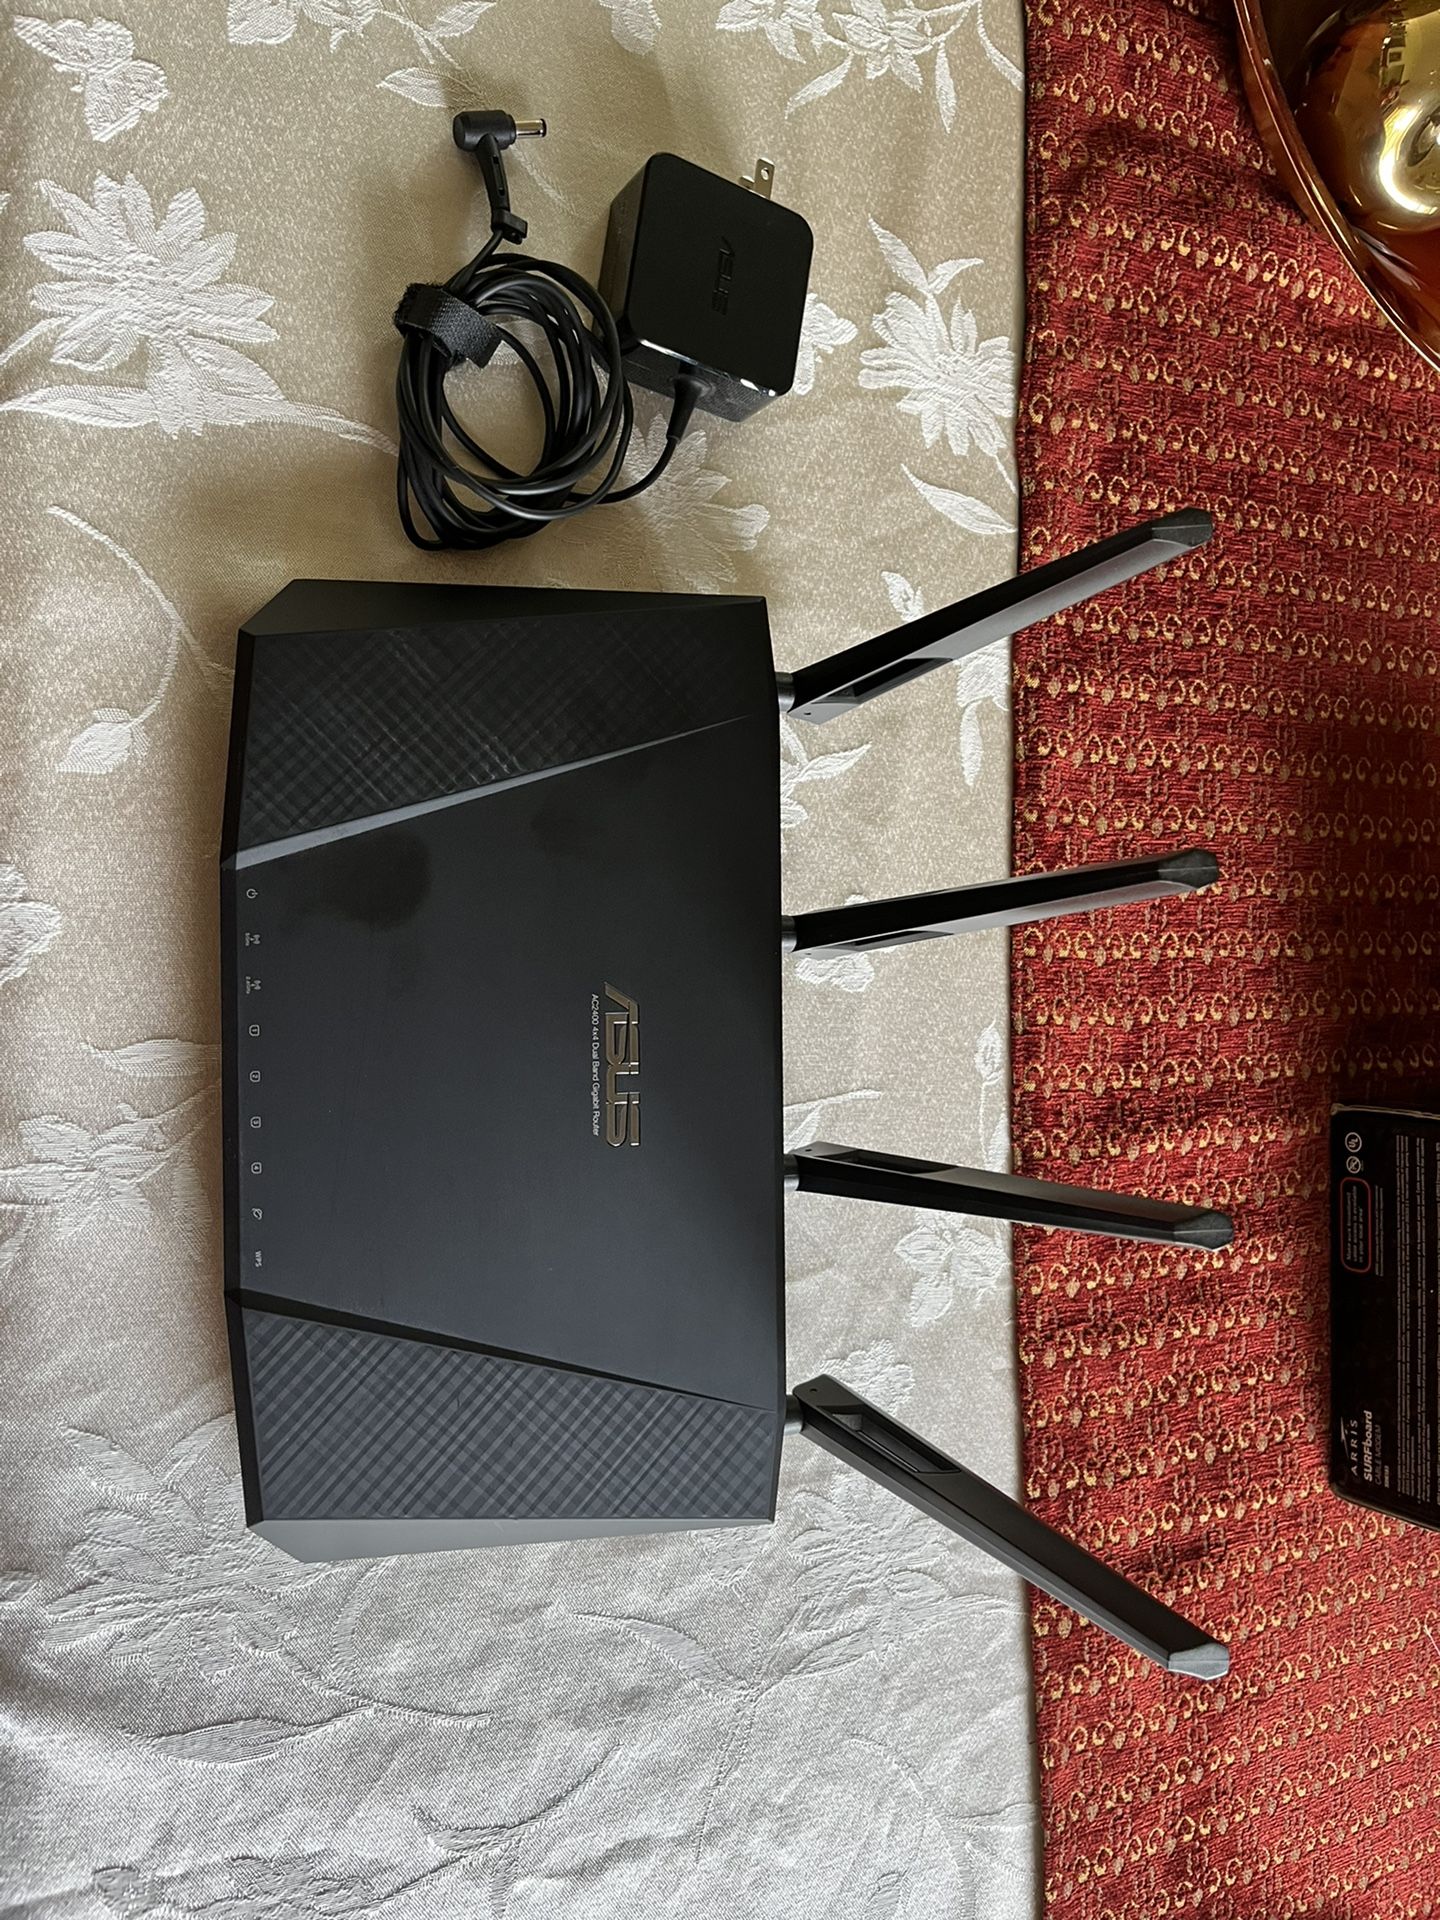 Asus AC2400 Wi-Fi Router